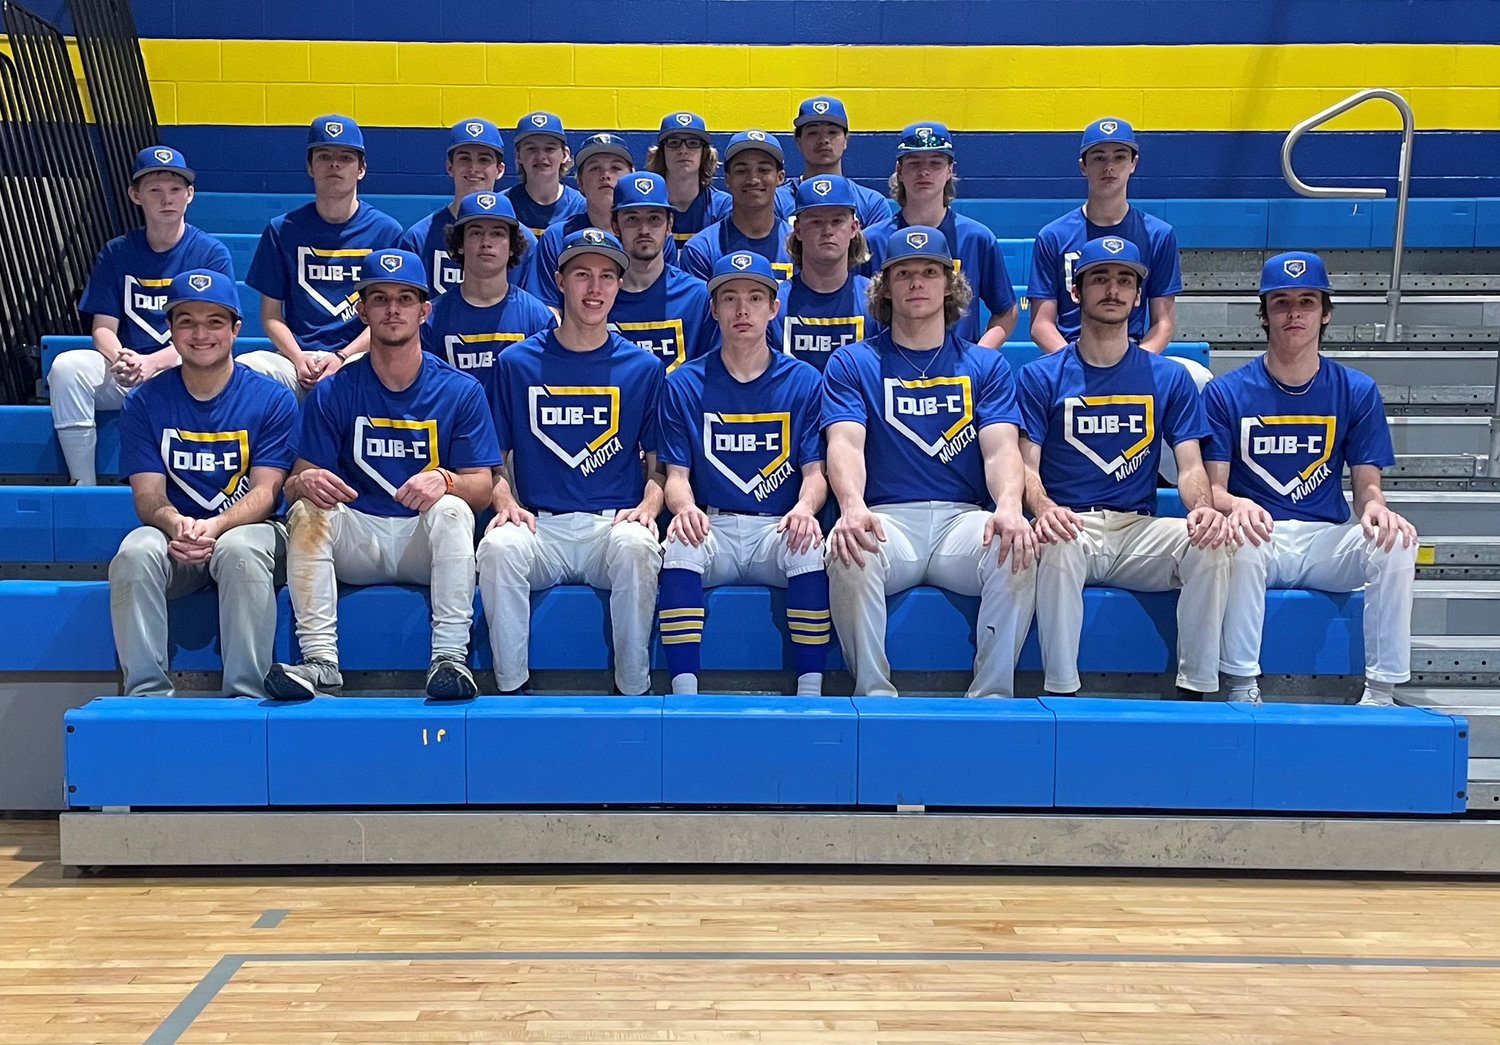 Members of the Wright City baseball team are, front row, from left: Braxton Loeffler, Blaine Niemann, Trey Brakensiek, Devin Foust, Hayden Waters, Nick Moore, Jake Mitts. 
Second row, left to right: Zach Rodriguez, Jack Goughenour, Bryce Williams. 
Third row, left to right: Lukas Lee, Easton Rohr, Micah Boeckman, Caden Crump, Duan McRoberts, Jake Orf, Drew Elsenrath.
Back row, left to right: Logan Rose, Christian Schutte, Hakeem Dowdy.